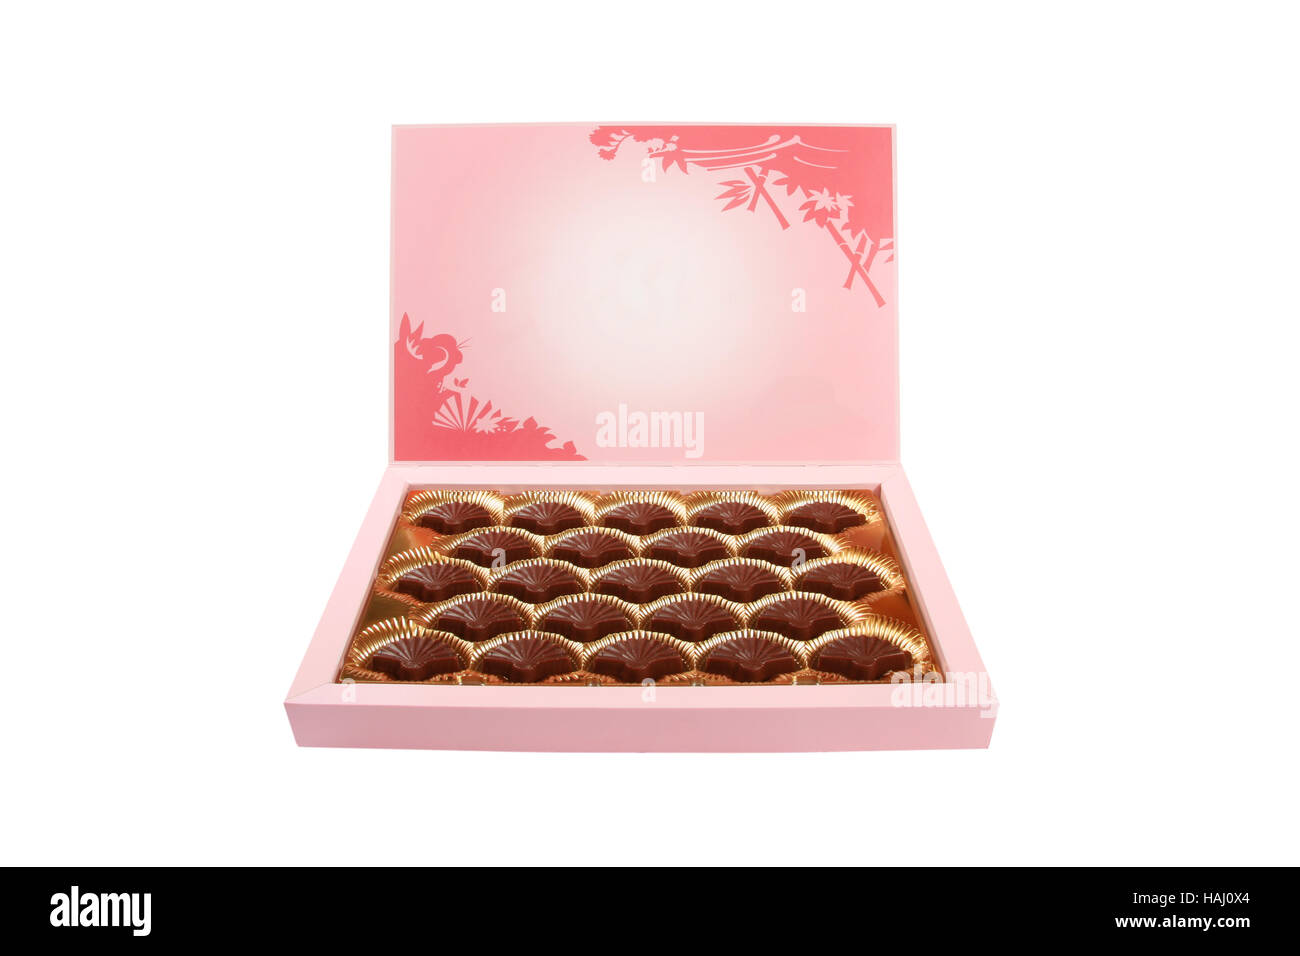 Chocolate candies in a box Stock Photo